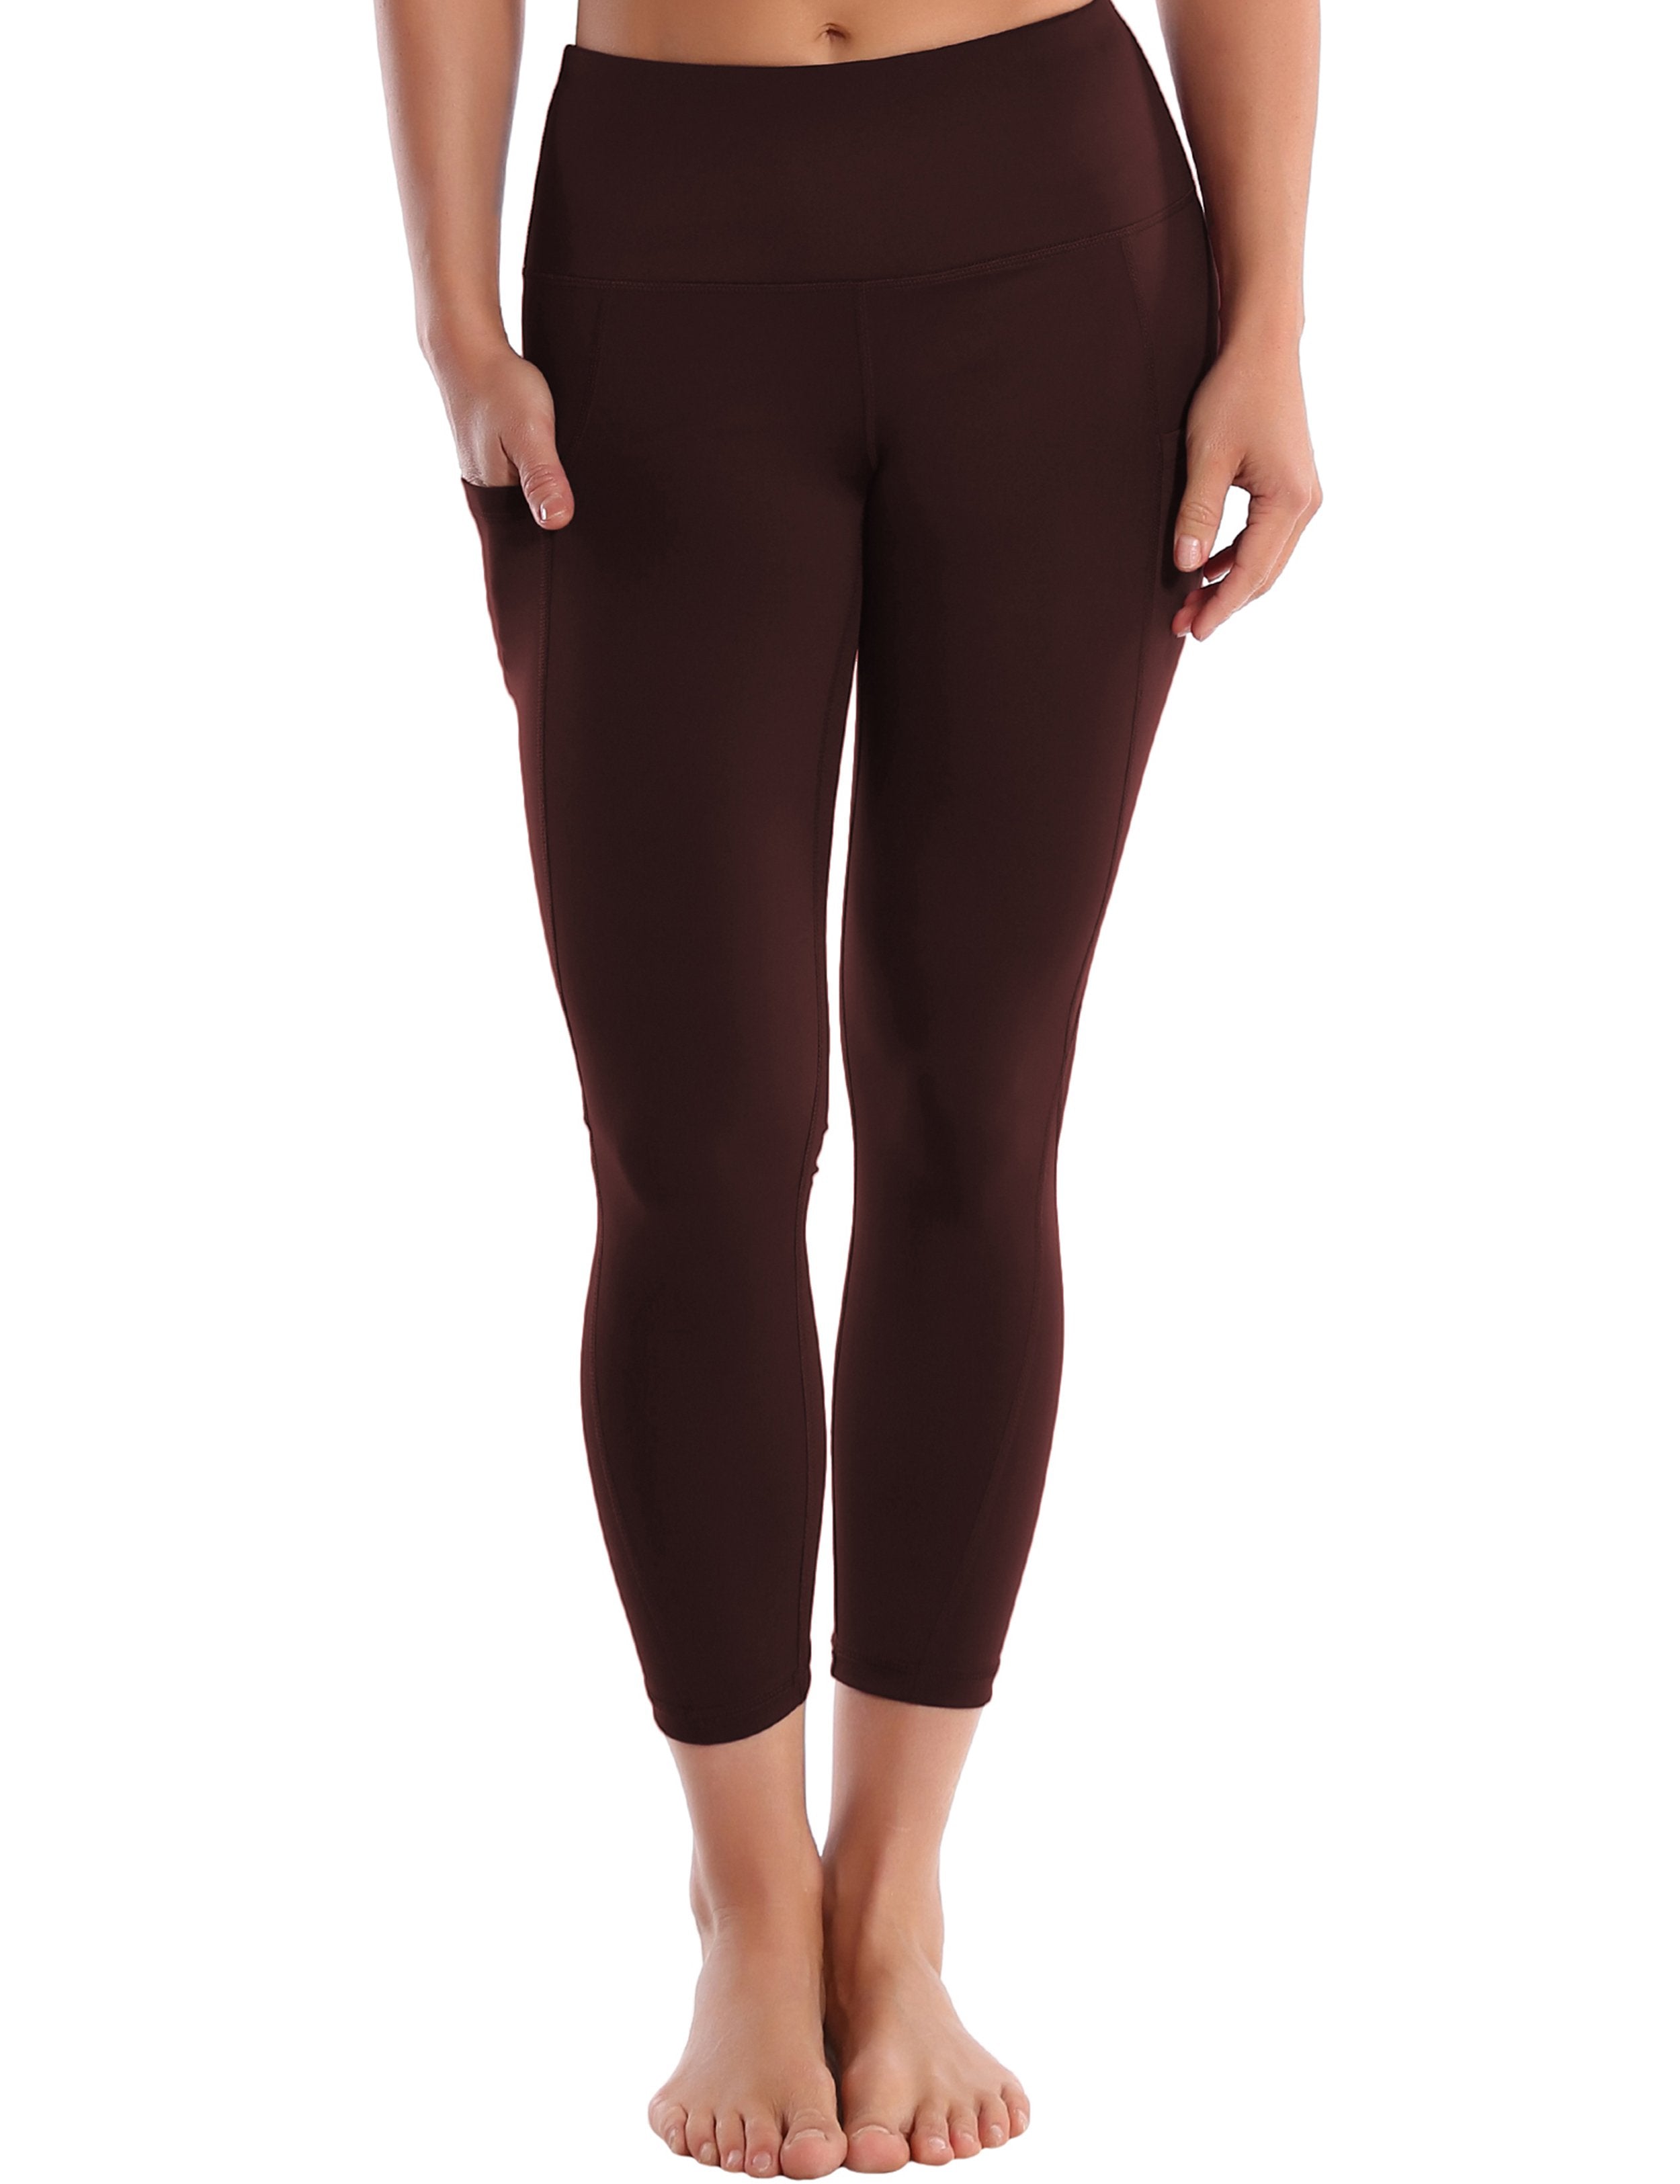 22" High Waist Side Pockets Capris mahoganymaroon 75%Nylon/25%Spandex Fabric doesn't attract lint easily 4-way stretch No see-through Moisture-wicking Tummy control Inner pocket